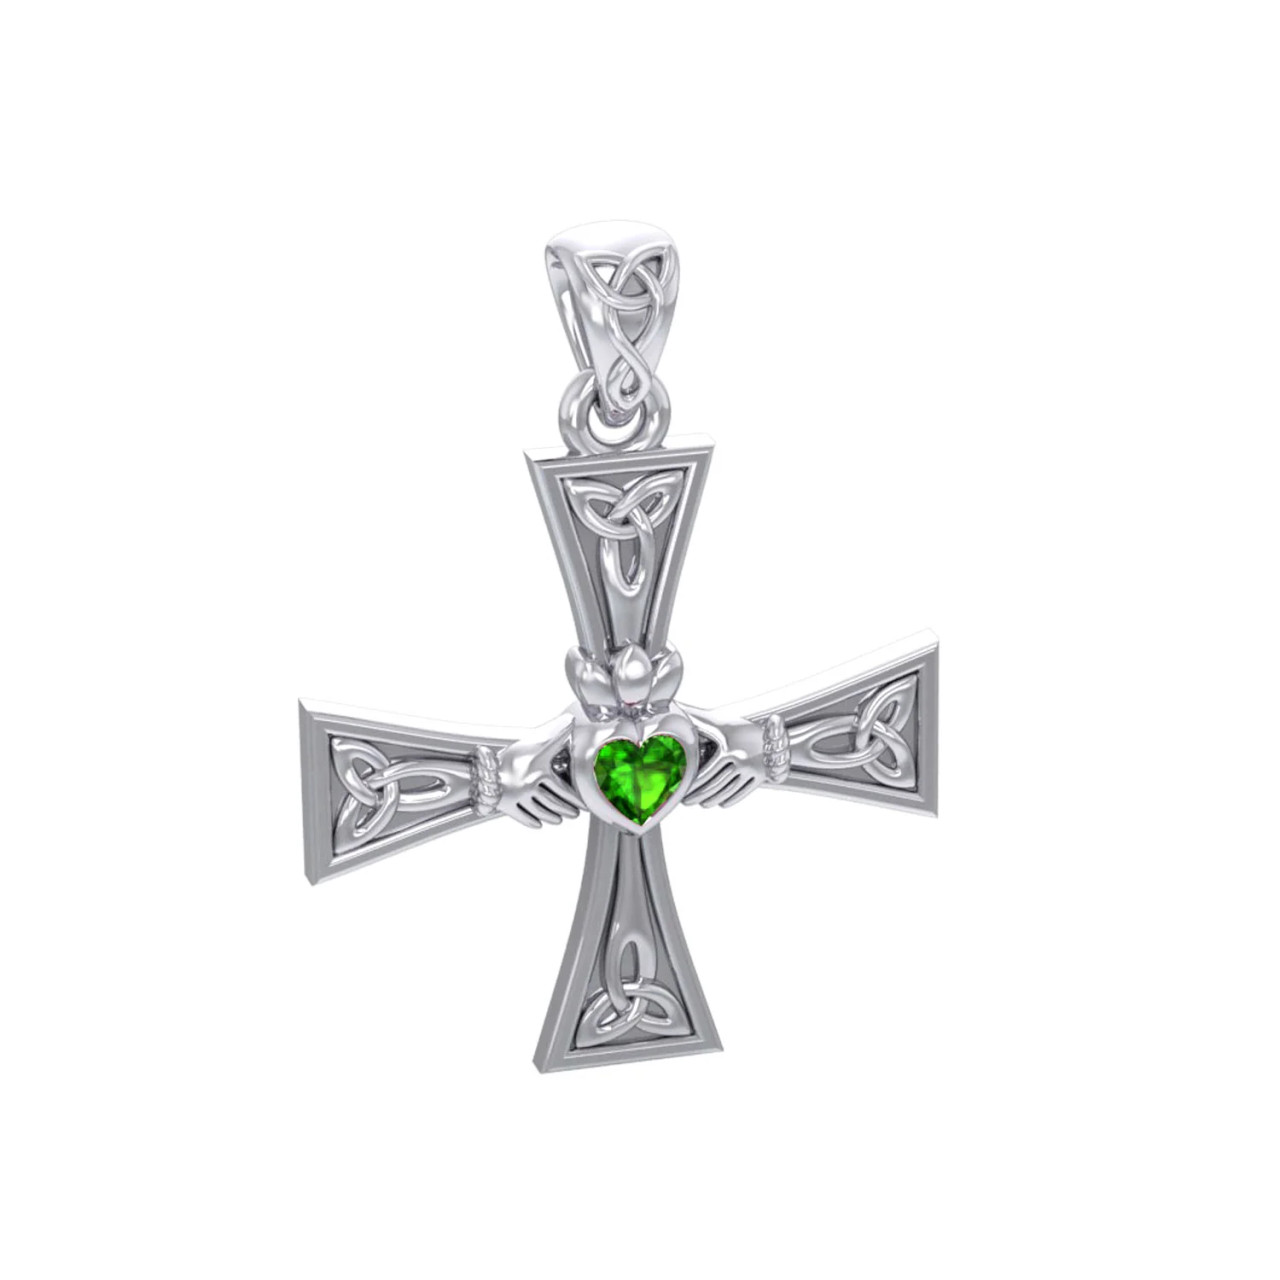 Green Malachite Sterling Silver Claddagh Pendant - Shanore - Fallers.com -  Fallers Irish Jewelry